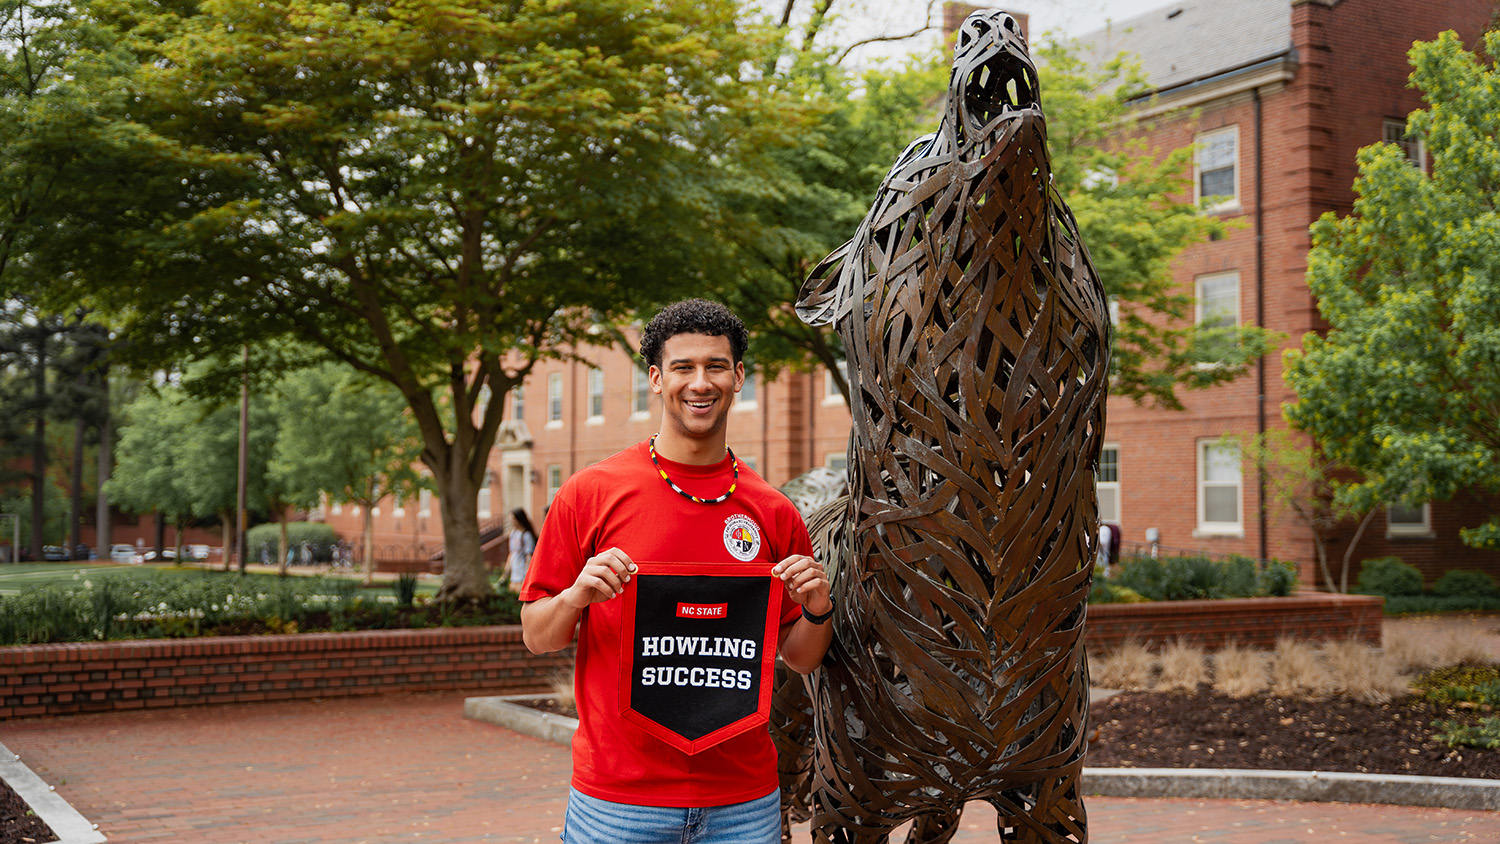 Nathan Campbell shows off his Howling Success banner in front of the Wolf Plaza statues.